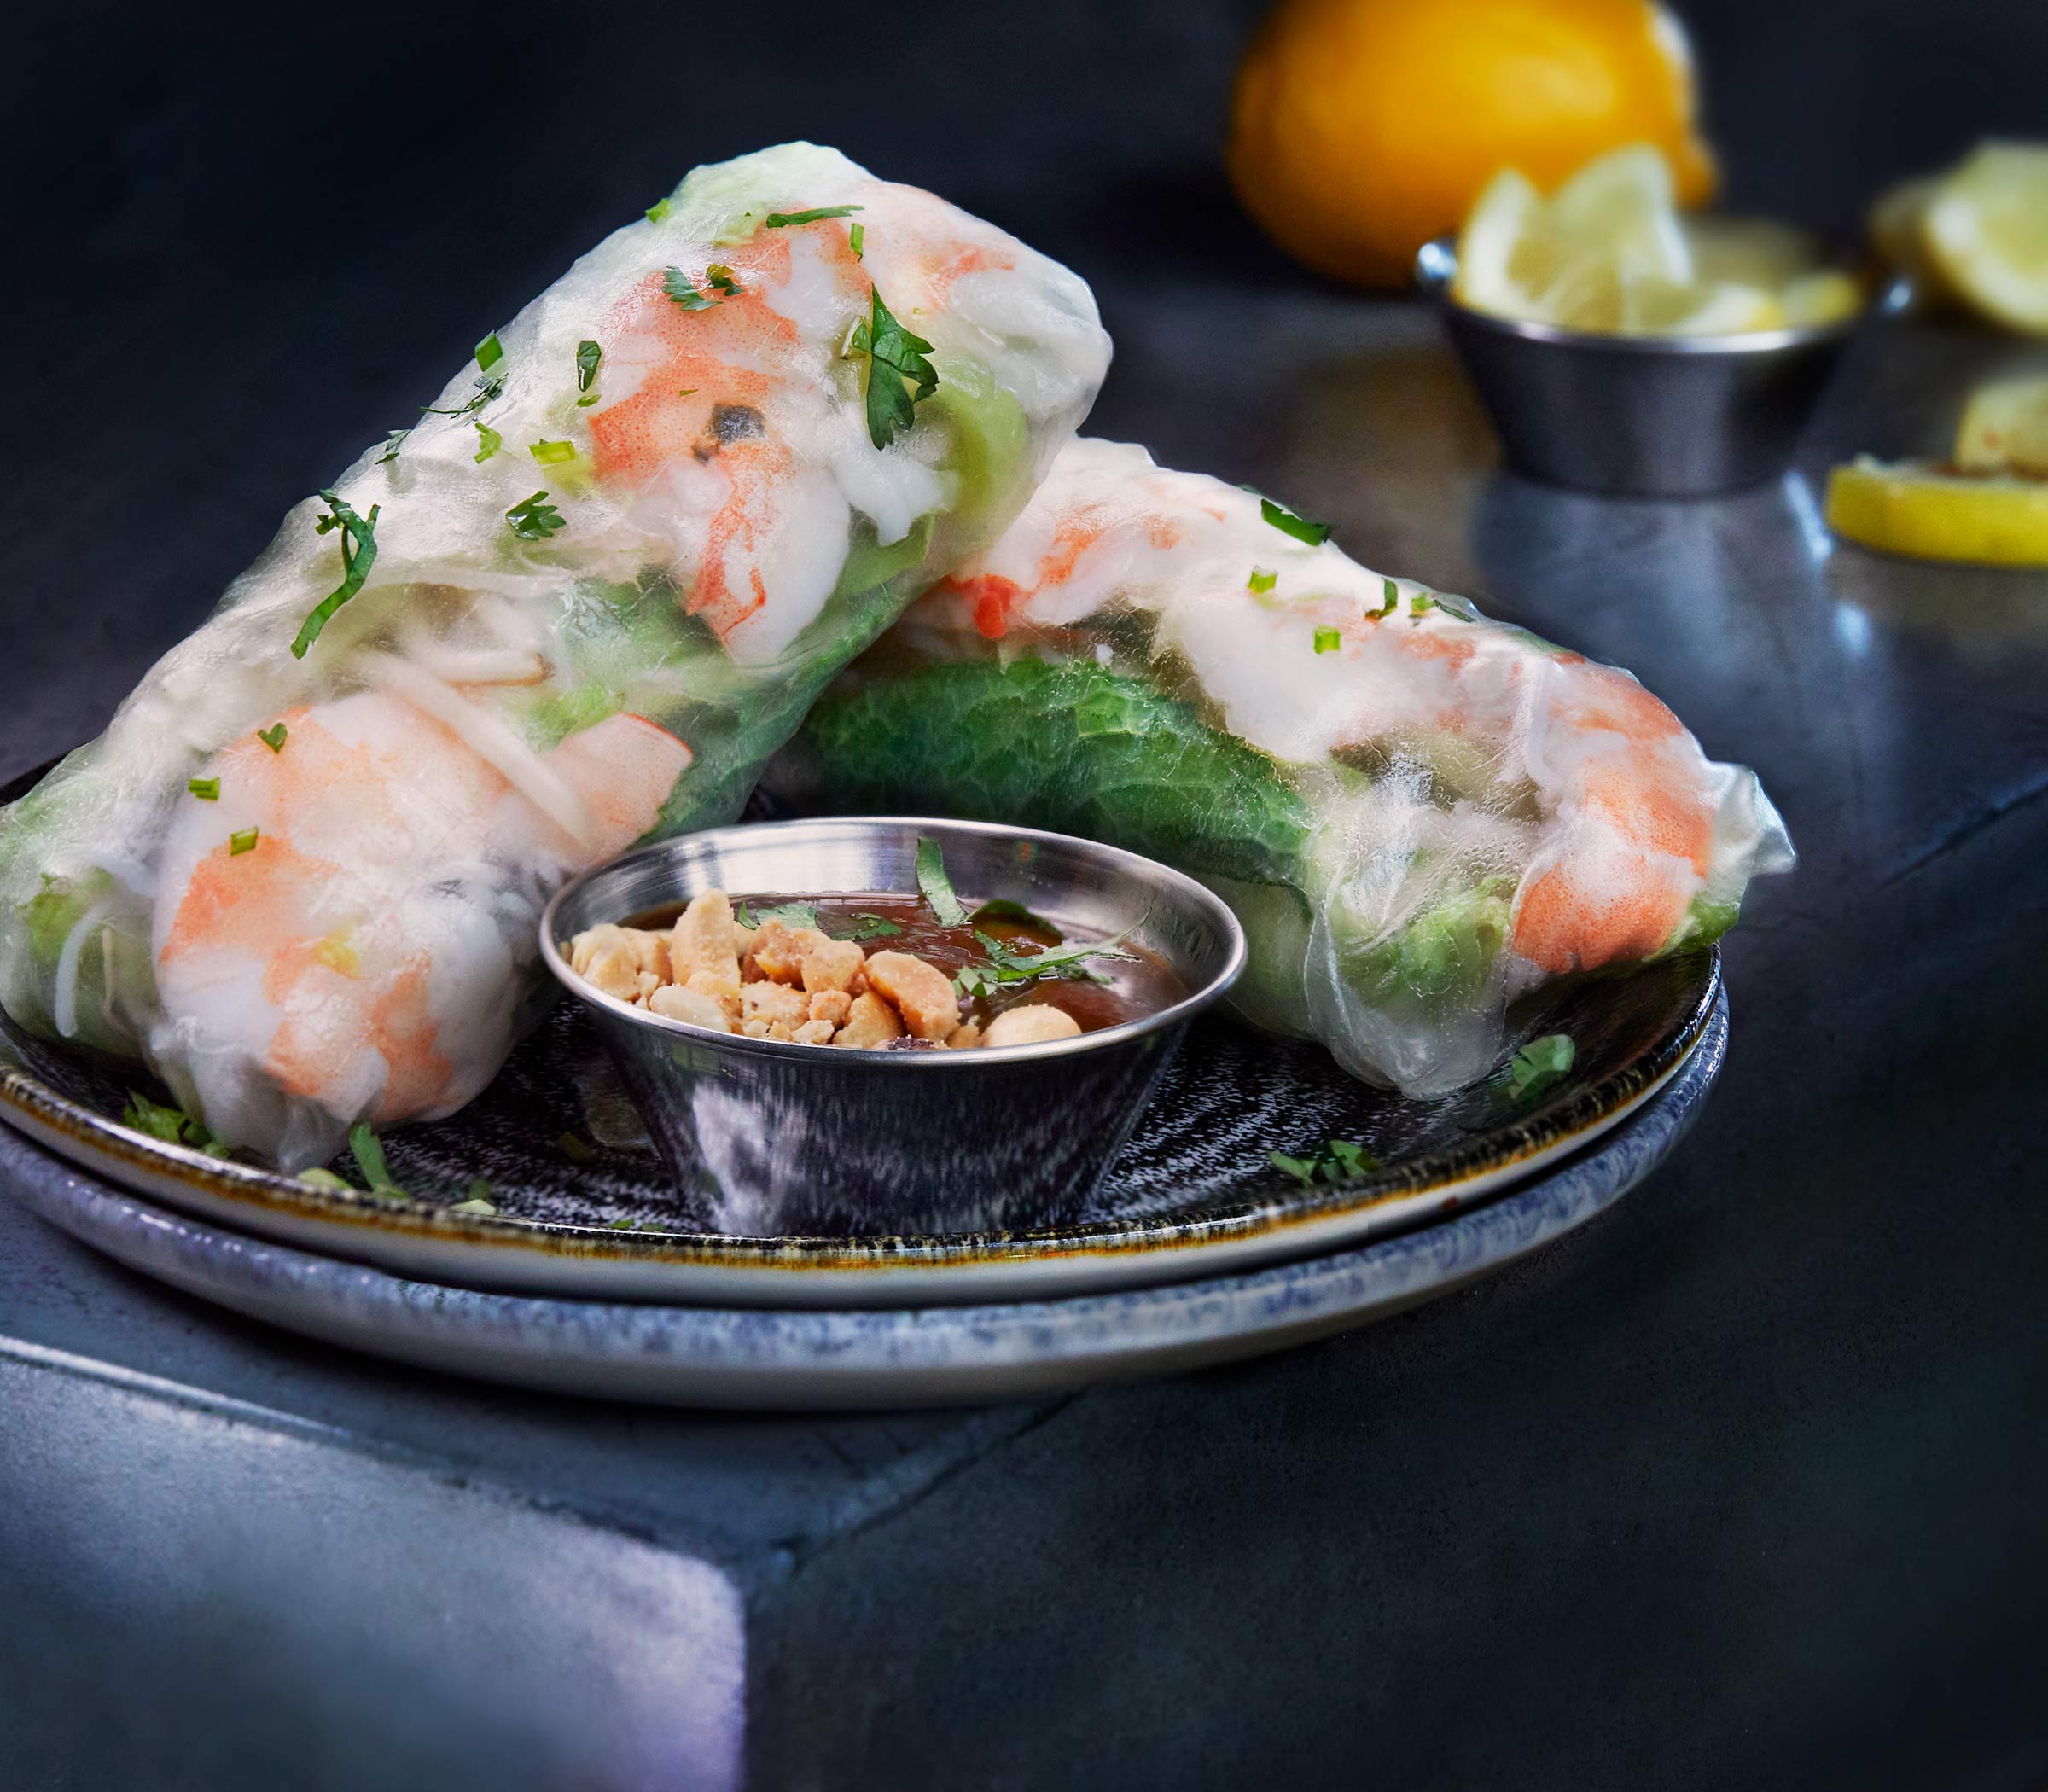 Summer Rolls with Peanut Dipping Sauce-Chilled rice wrap, jumbo shrimp, rice noodles, lettuce, basil, mint, bean sprouts.